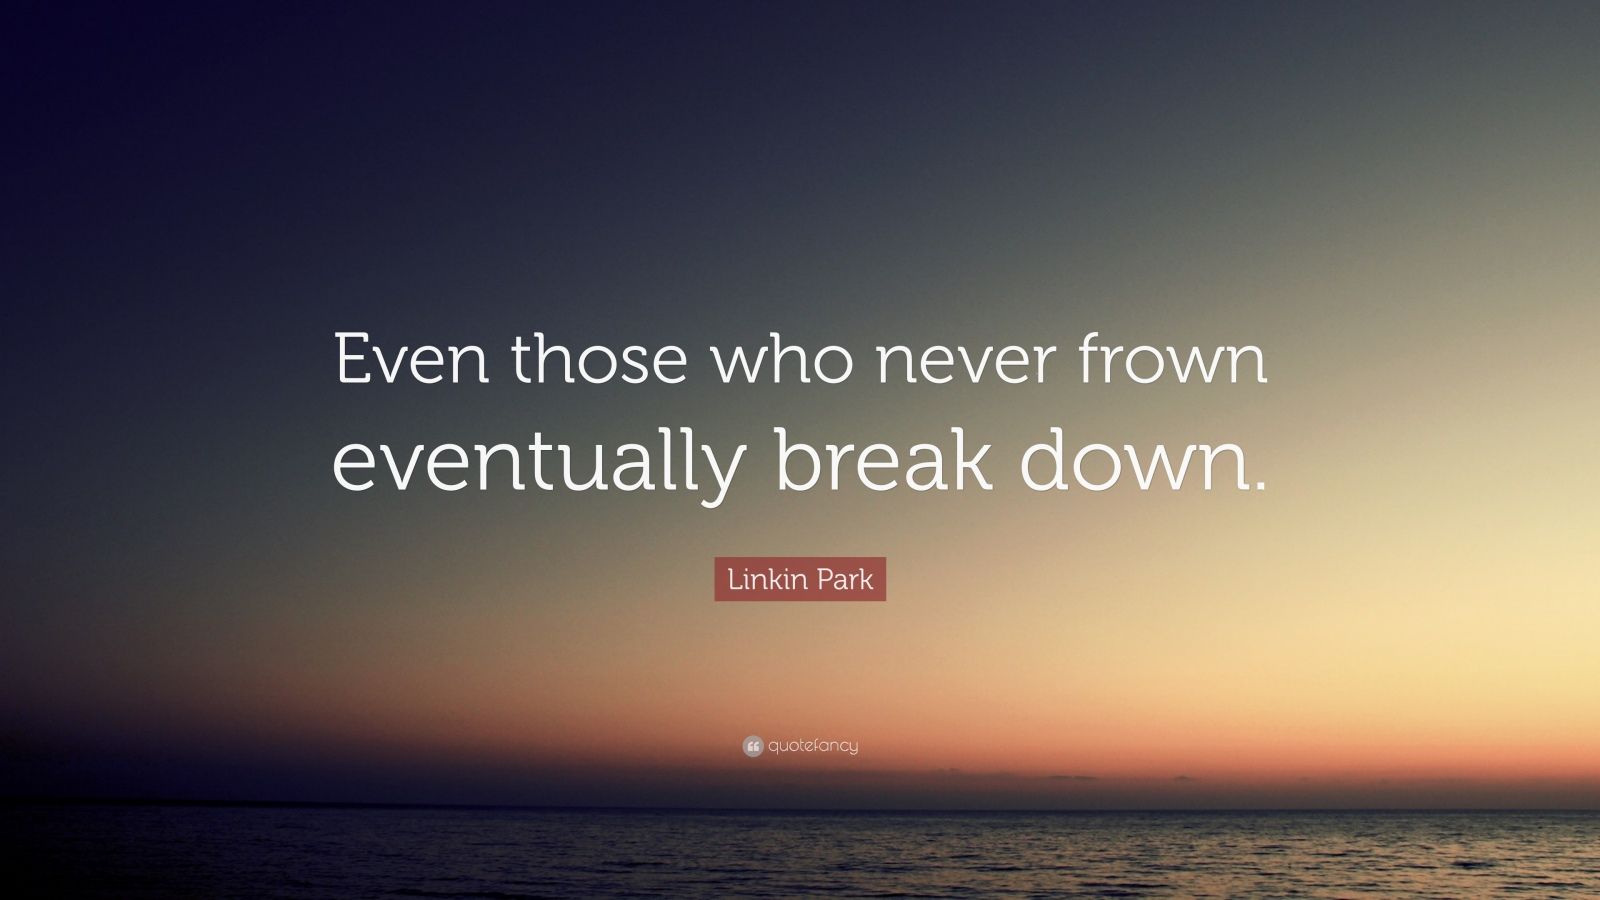 Linkin Park Quote: “Even those who never frown eventually break down ...